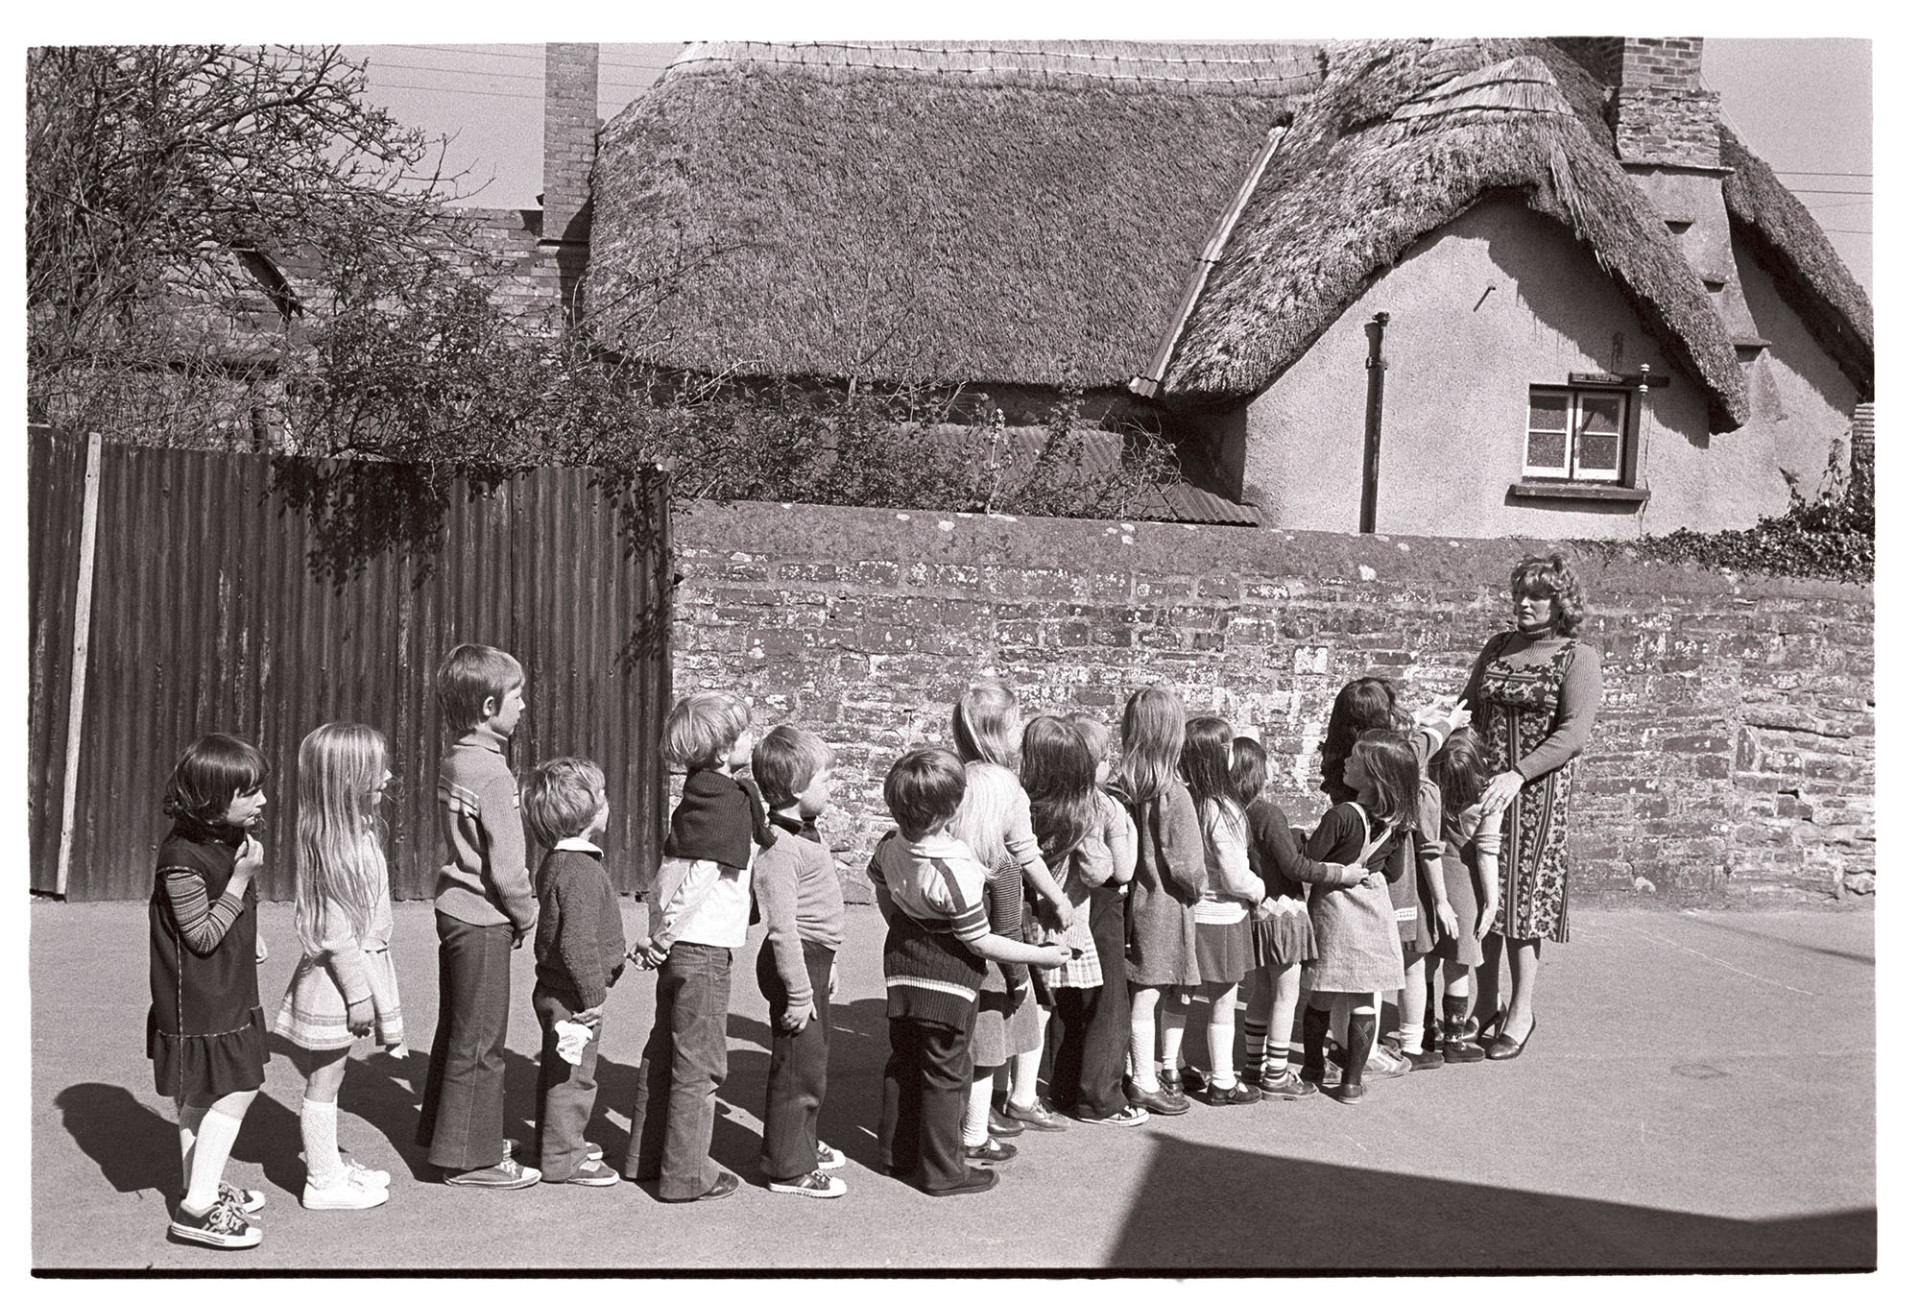 Primary School children lined up in yard with teacher. <br />
[Children lined up in front of their teacher, Sheila McCulloch in Dolton Primary School playground. The fifth child from left is Ben Ravilious. A thatched cottage is in the background.]